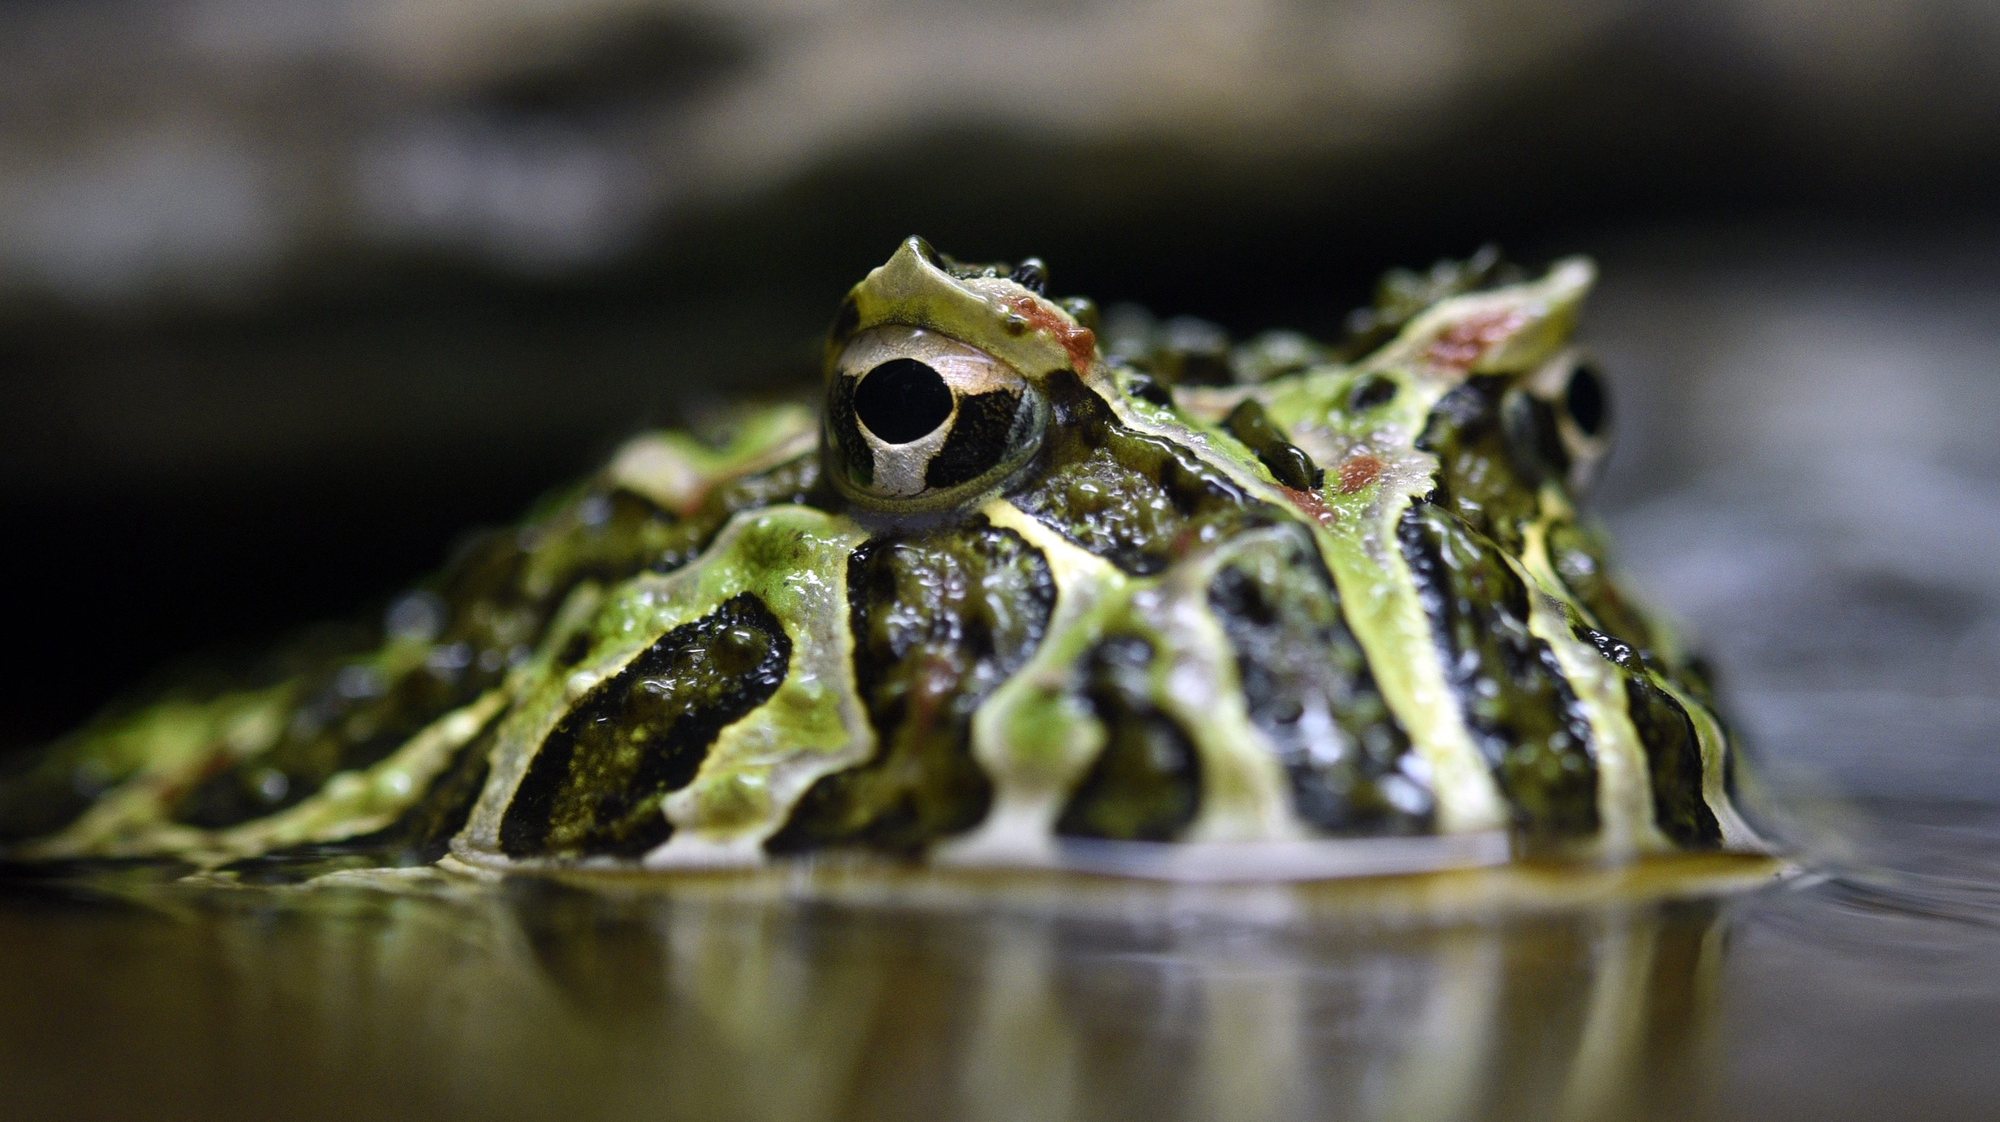 epa04962444 An ornate horned frog (Ceratophrys ornata) at the Ueno Zoological Gardens in Tokyo, Japan, 04 October 2015. The Ueno Zoological Gardens is the oldest zoo in Japan. Founded in 1882, it is now home to over 3,000 animals from some 400 different species.  EPA/FRANCK ROBICHON